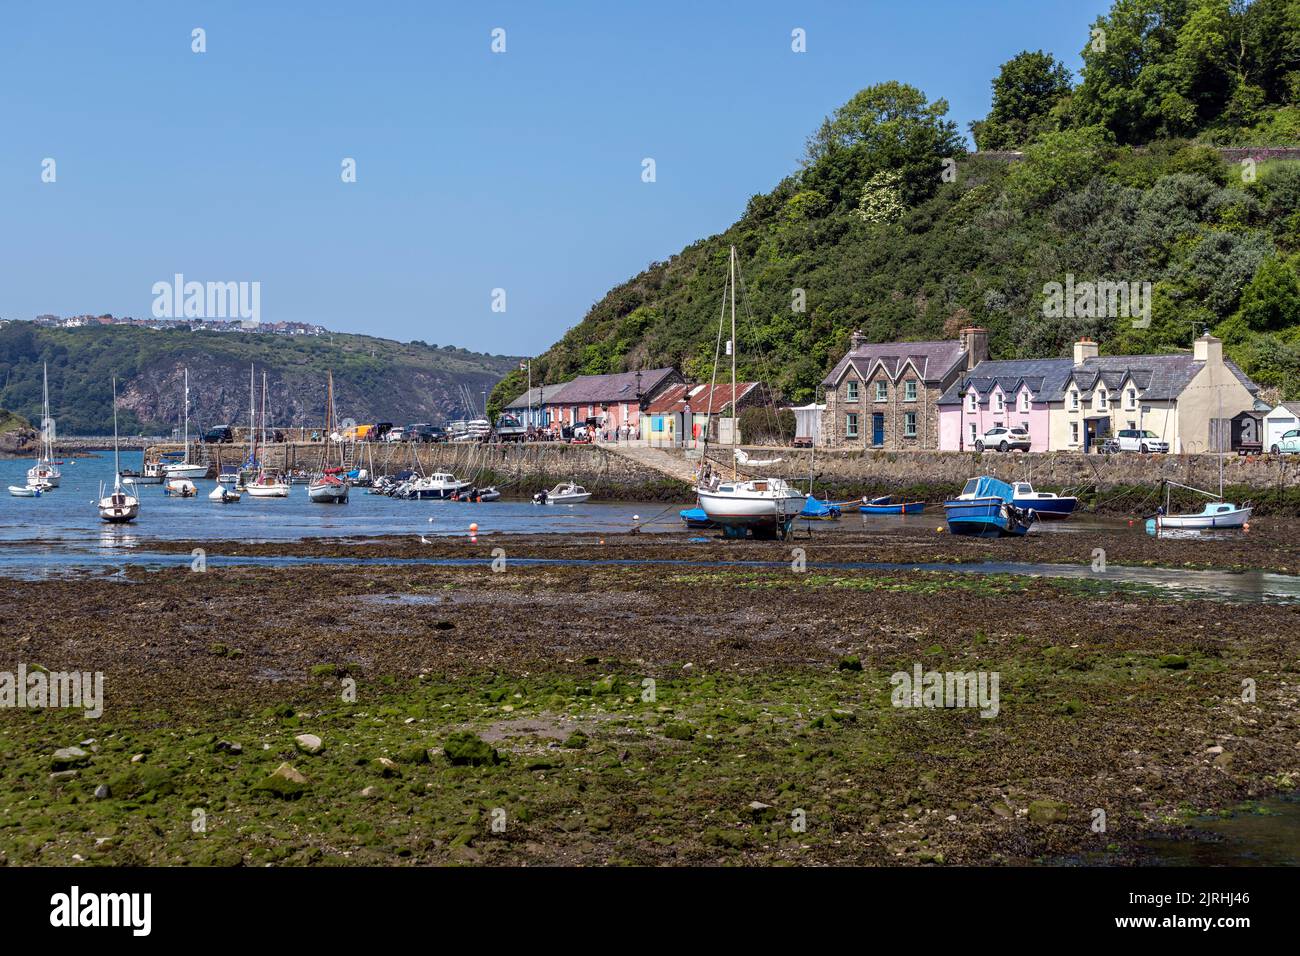 Boats in quay in village of Fishguard, Pembrokeshire, Wales, UK Stock Photo